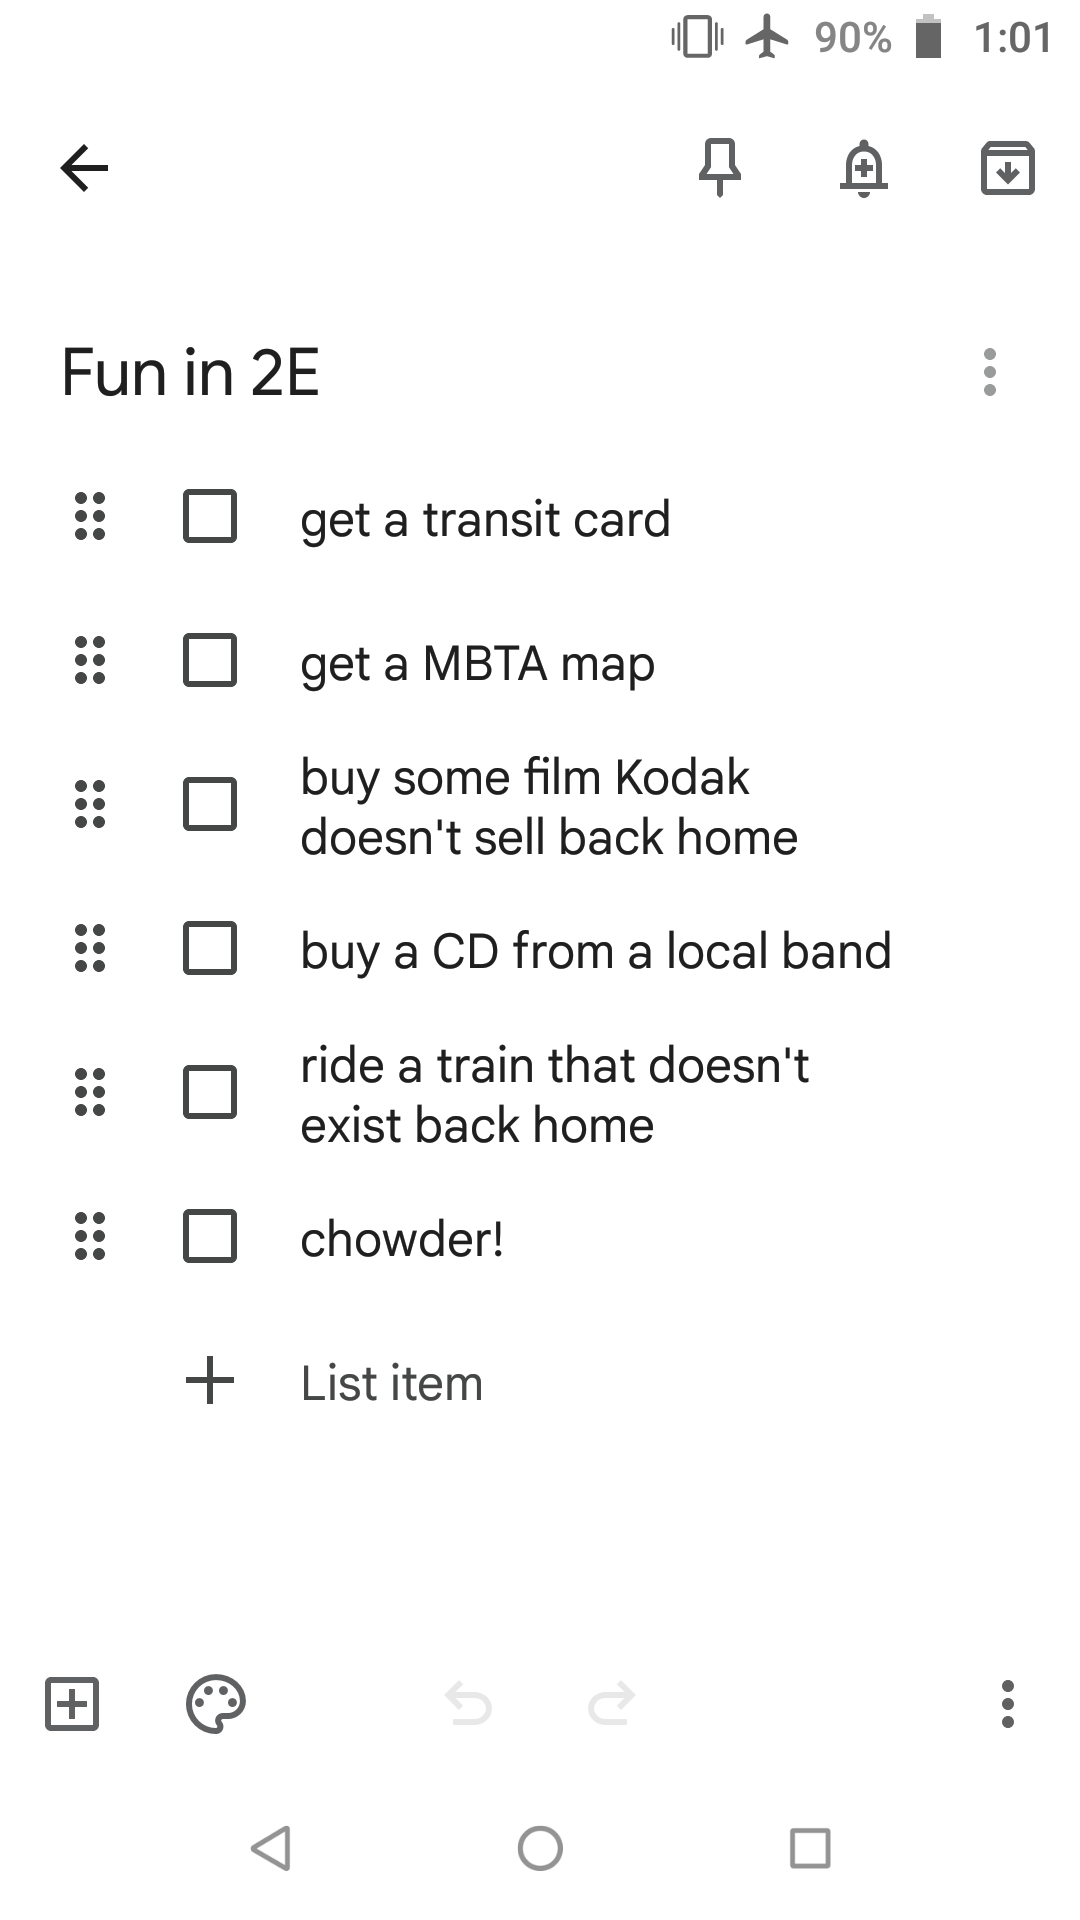 THE LIST: (a screenshot of a google keep note)
    -get a transit card
    -get a map of the MBTA
    -buy some film that Kodak doesn't sell back home
    -buy a CD from a local band
    -ride a train that doesn't exist back home
    -chowder!